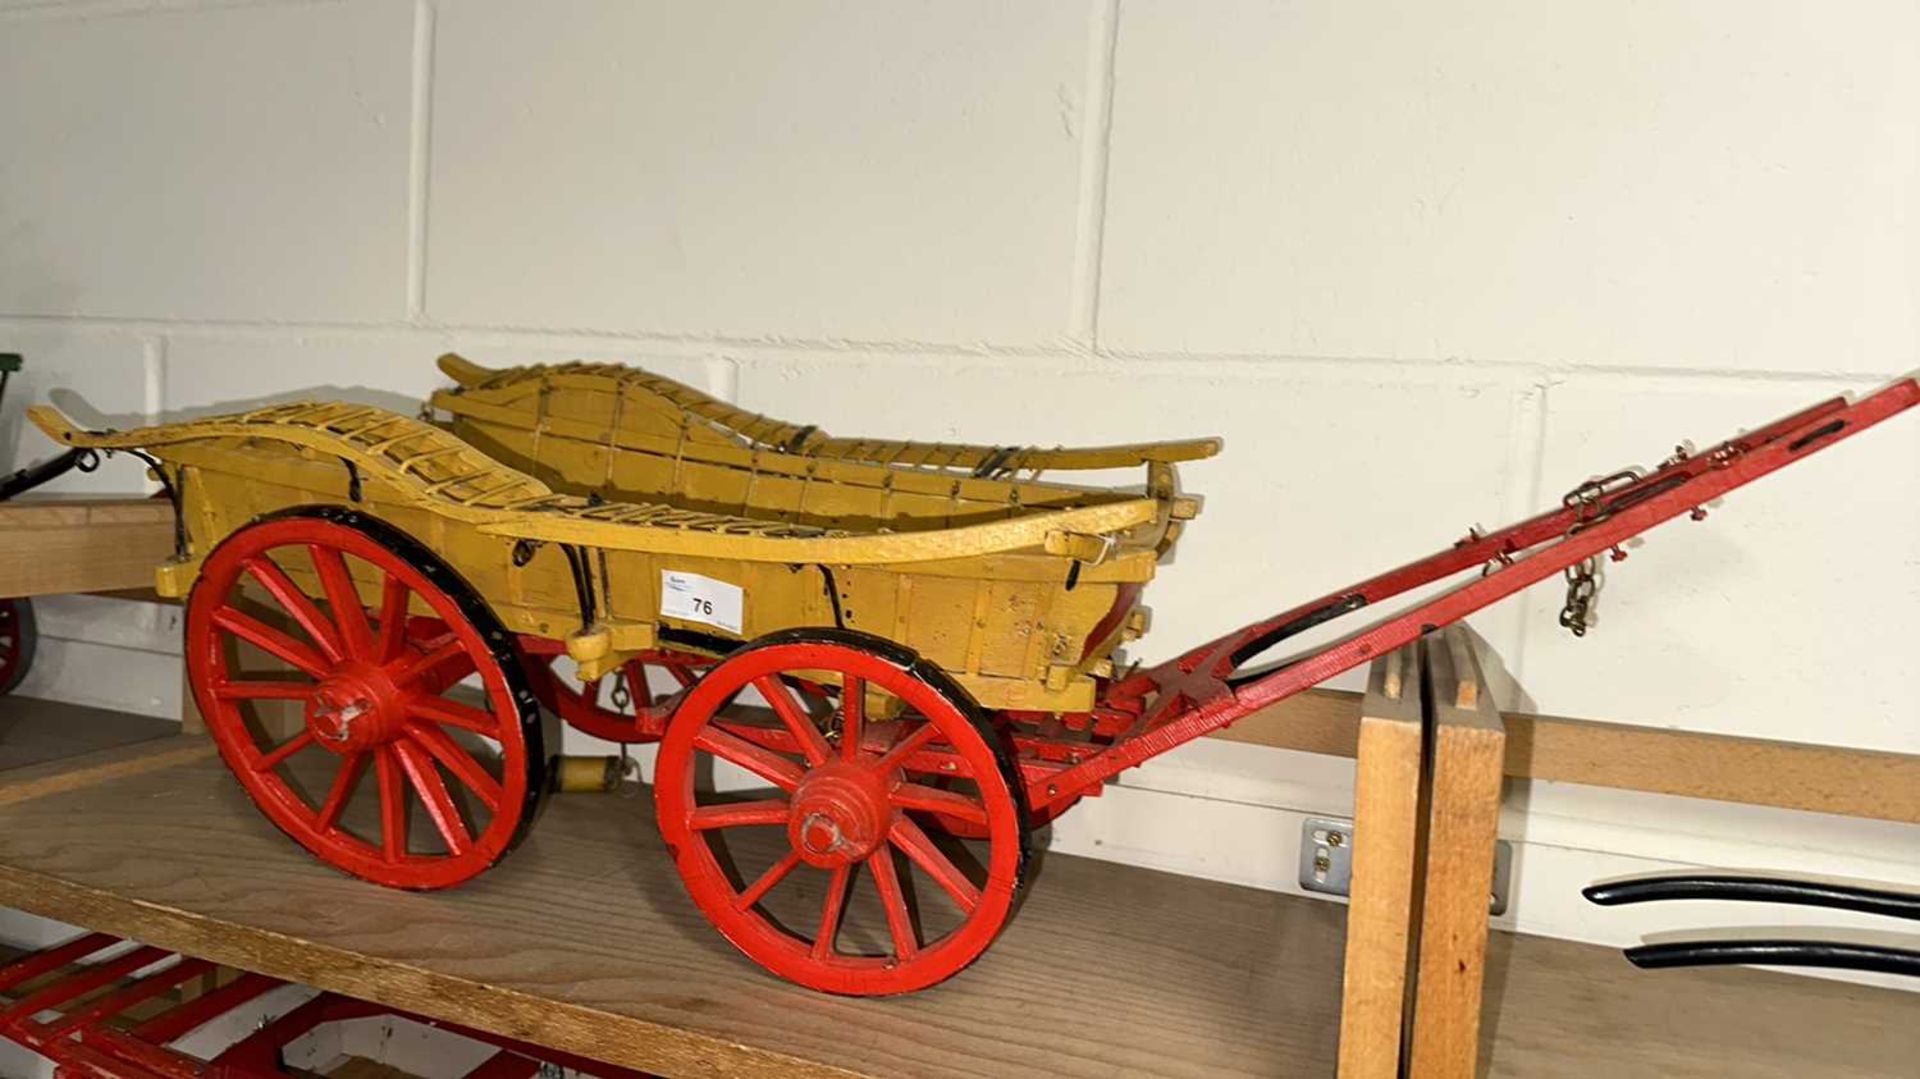 A scratch built model of an Oxford Wagon, painted in beige and red, approx 80cm long in total